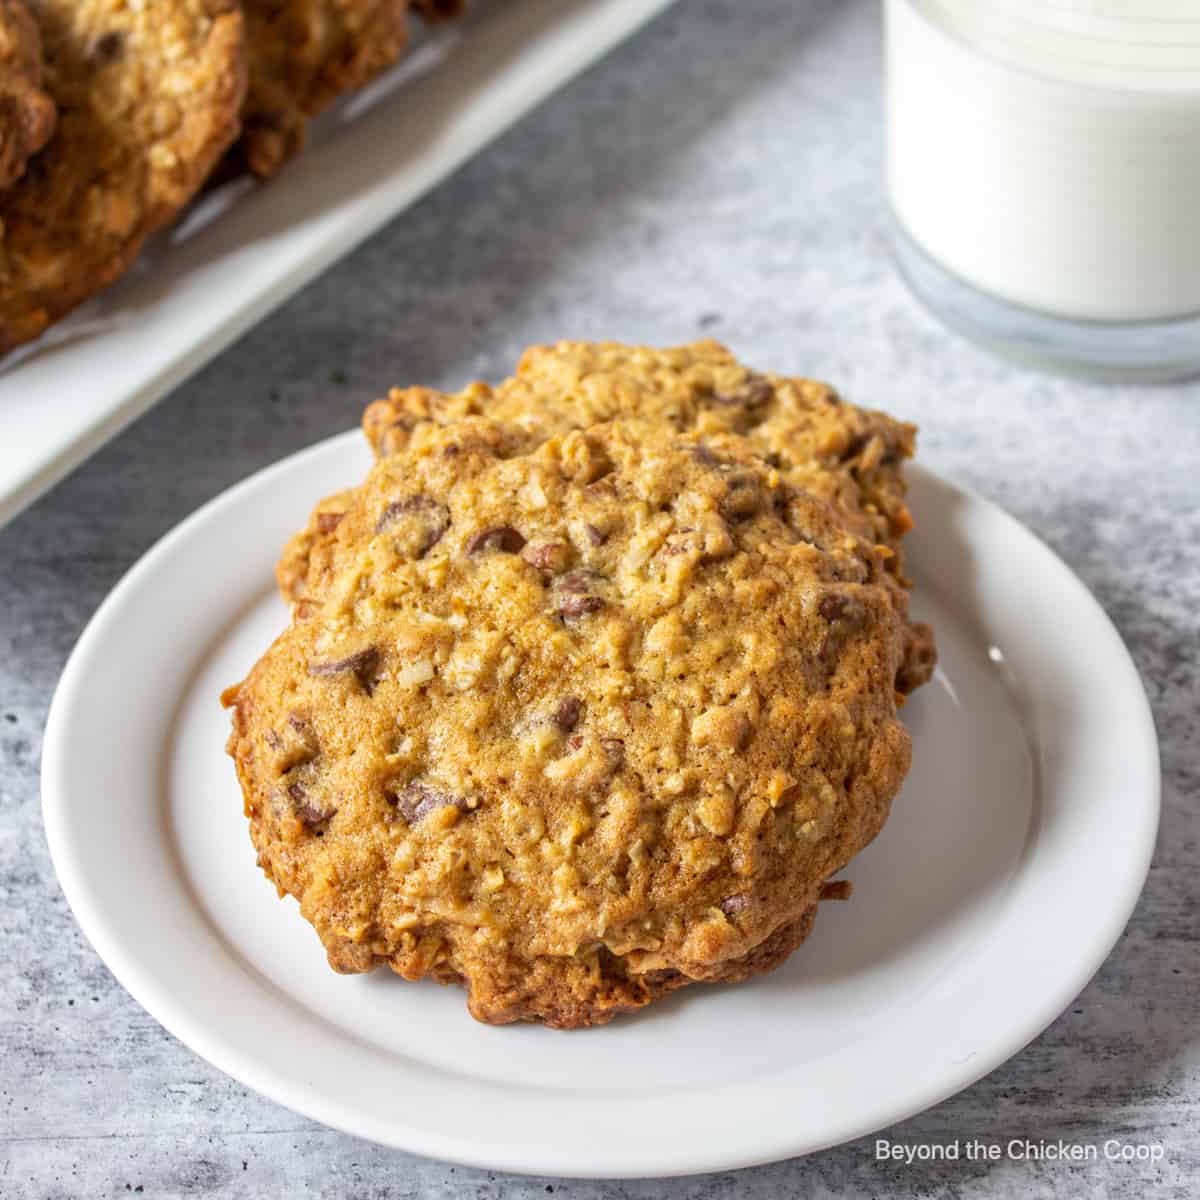 Two chocolate chip cookies with nuts and oats on a small white plate.